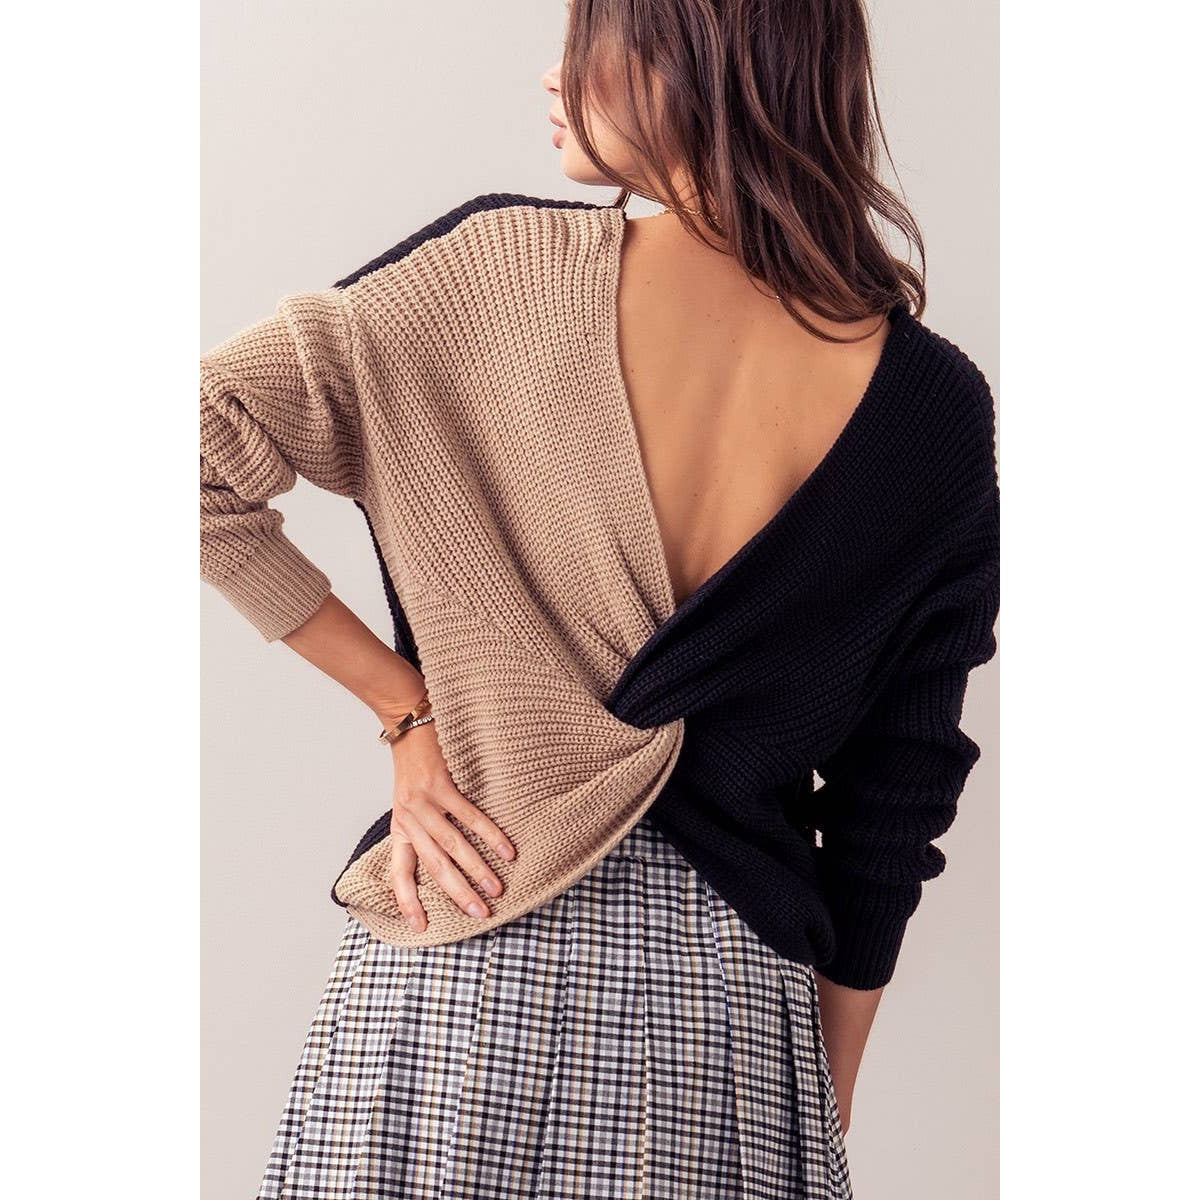 URBAN-DAIZY-COLORBLOCK-TWIST-OPEN-BACK-SWEATER - TANK TOP - Synik Clothing - synikclothing.com